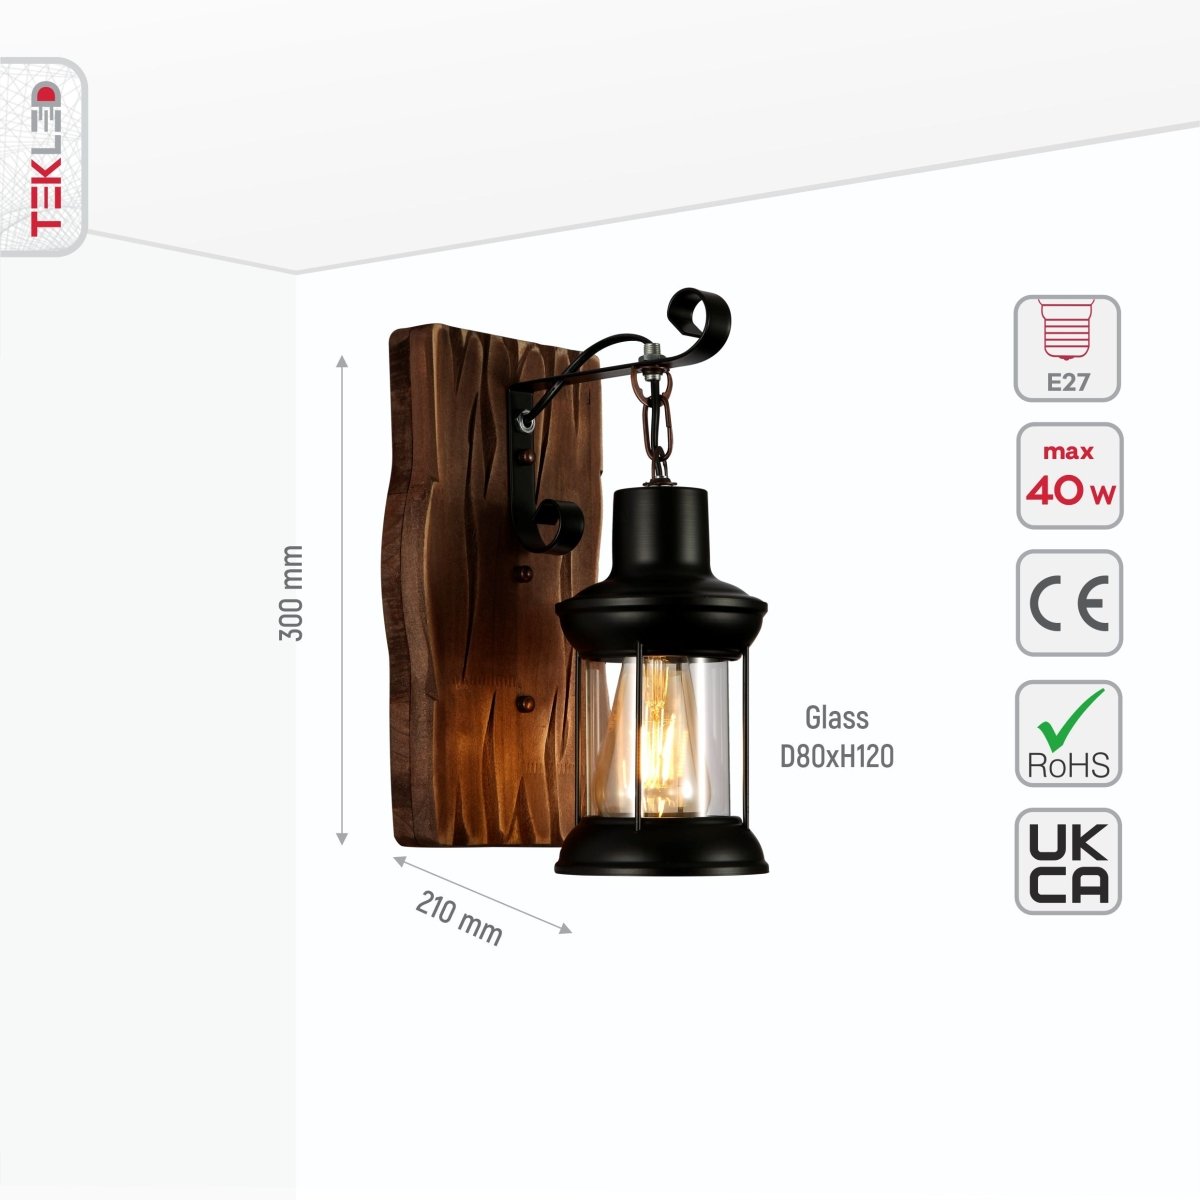 Size and specs of Iron and Wood Glass Cylinder Wall Light E27 | TEKLED 159-17850